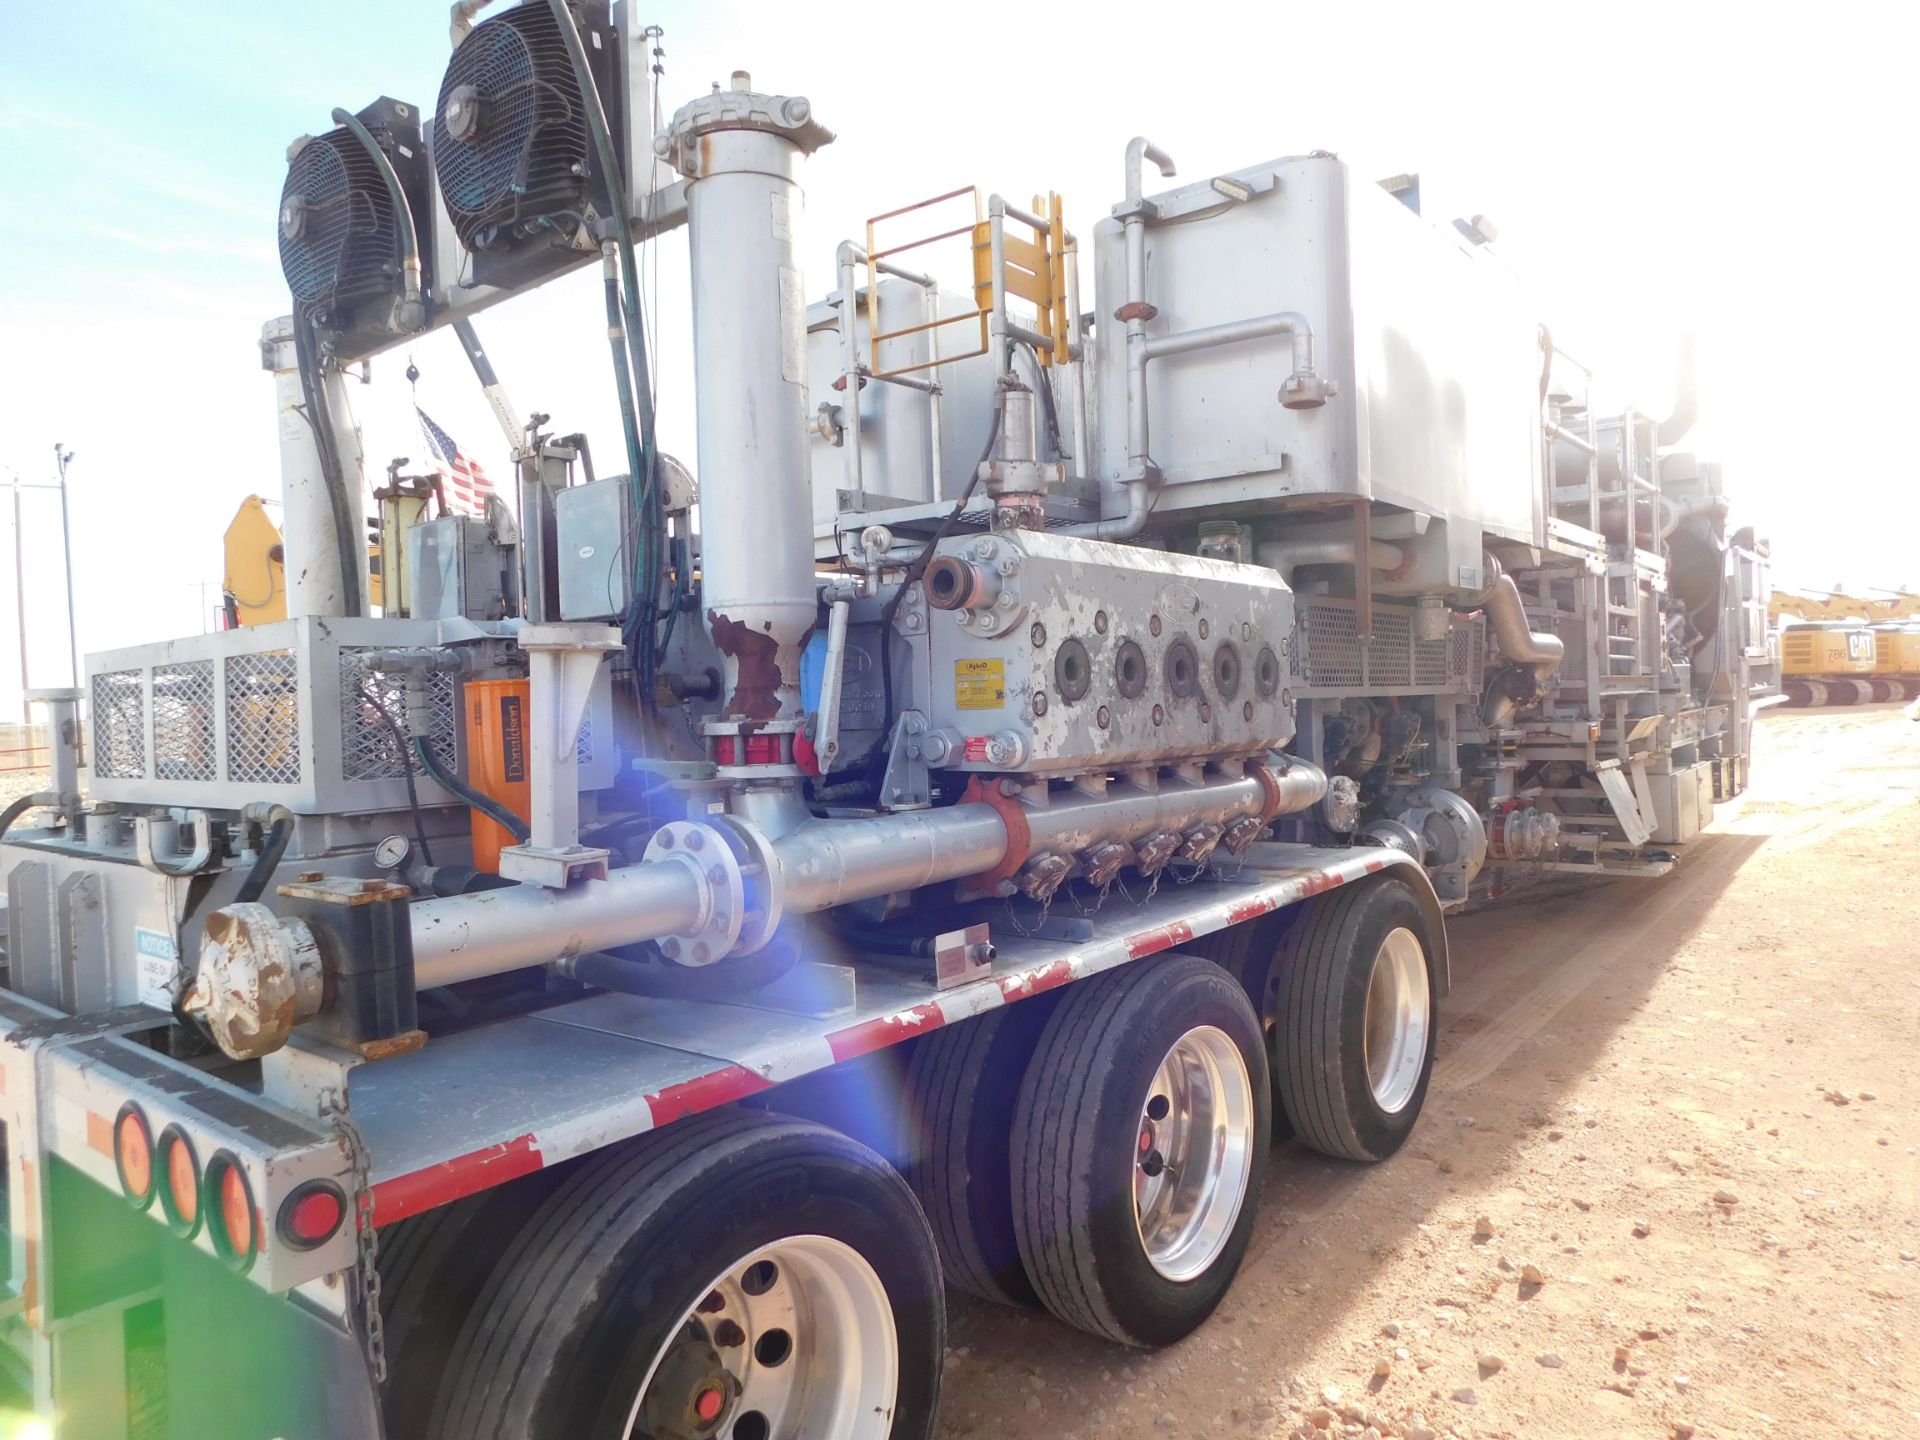 Located in YARD 1 - Midland, TX (X) 2018 PREMIER COIL SOLUTIONS, MODEL - FTT-086 - Image 13 of 25